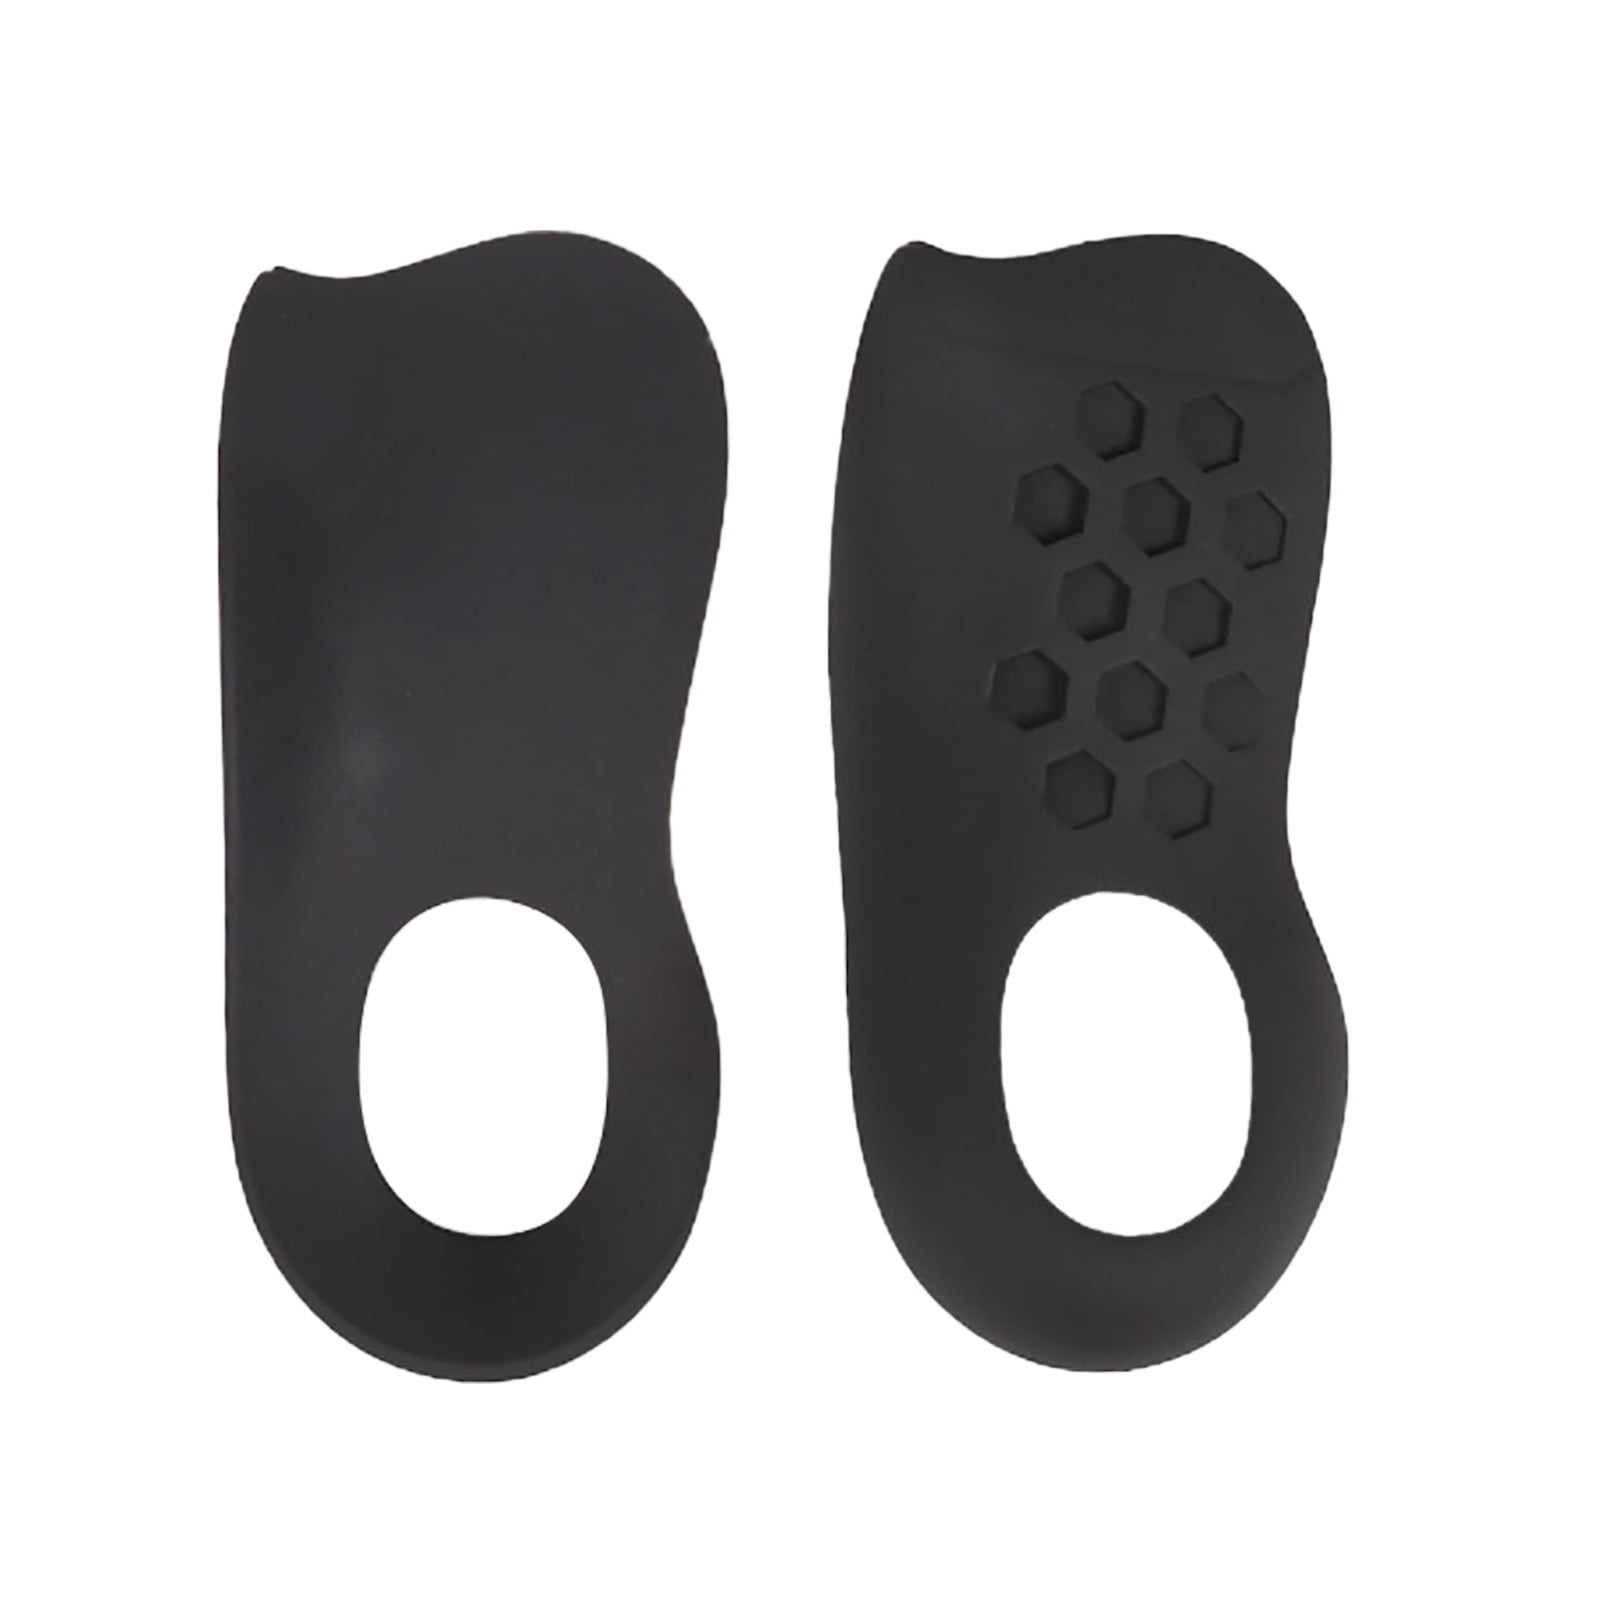 Flat Inserts for Shoes Boots sport ALL WIDTHS Foam Insoles 1/8" Black or Blue 